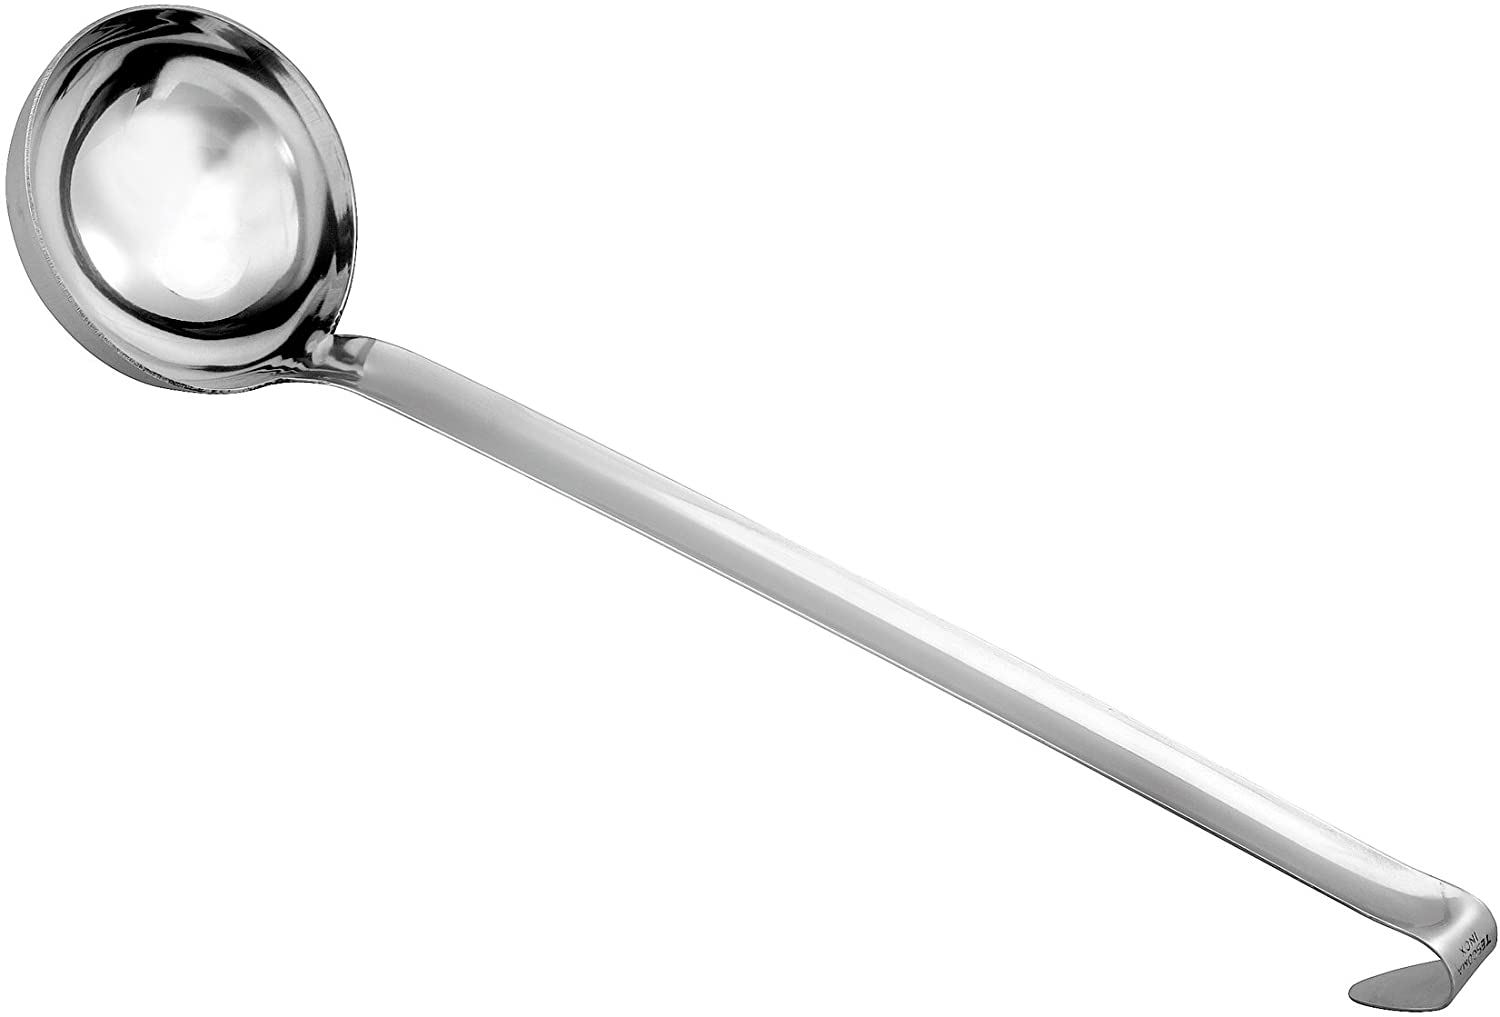 Tescoma 428310 Ladle, Stainless Steel, Grey, 30.5 x 7.5 x 5.1 cm